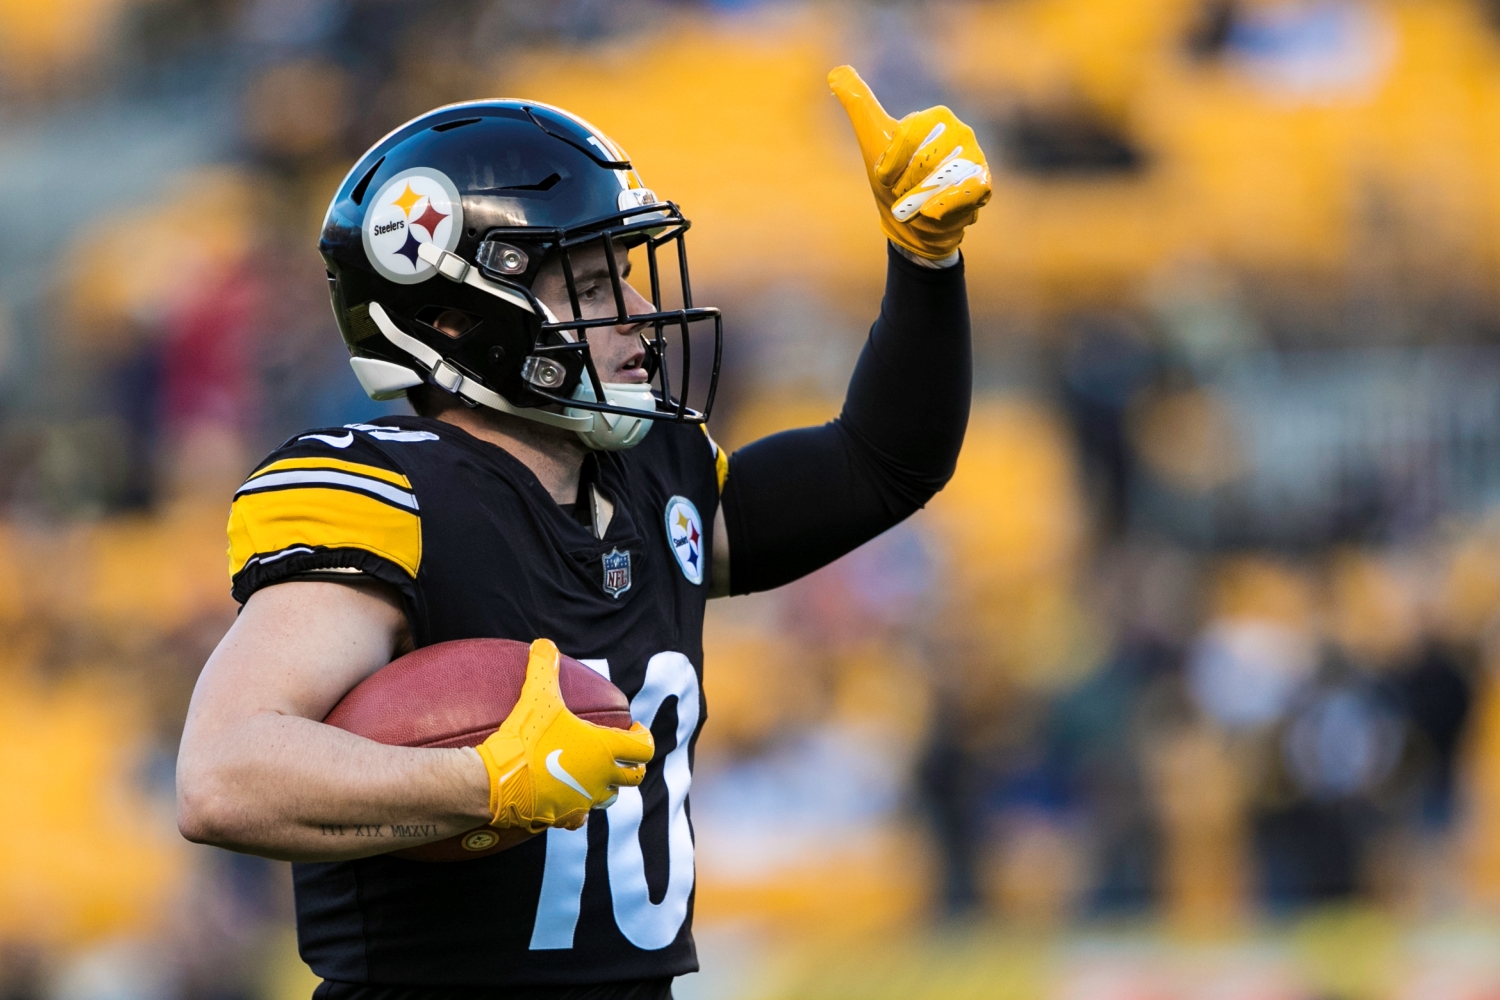 Ryan Switzer gives a thumbs up during a game between the Pittsburgh Steelers and the Cincinnati Bengals.